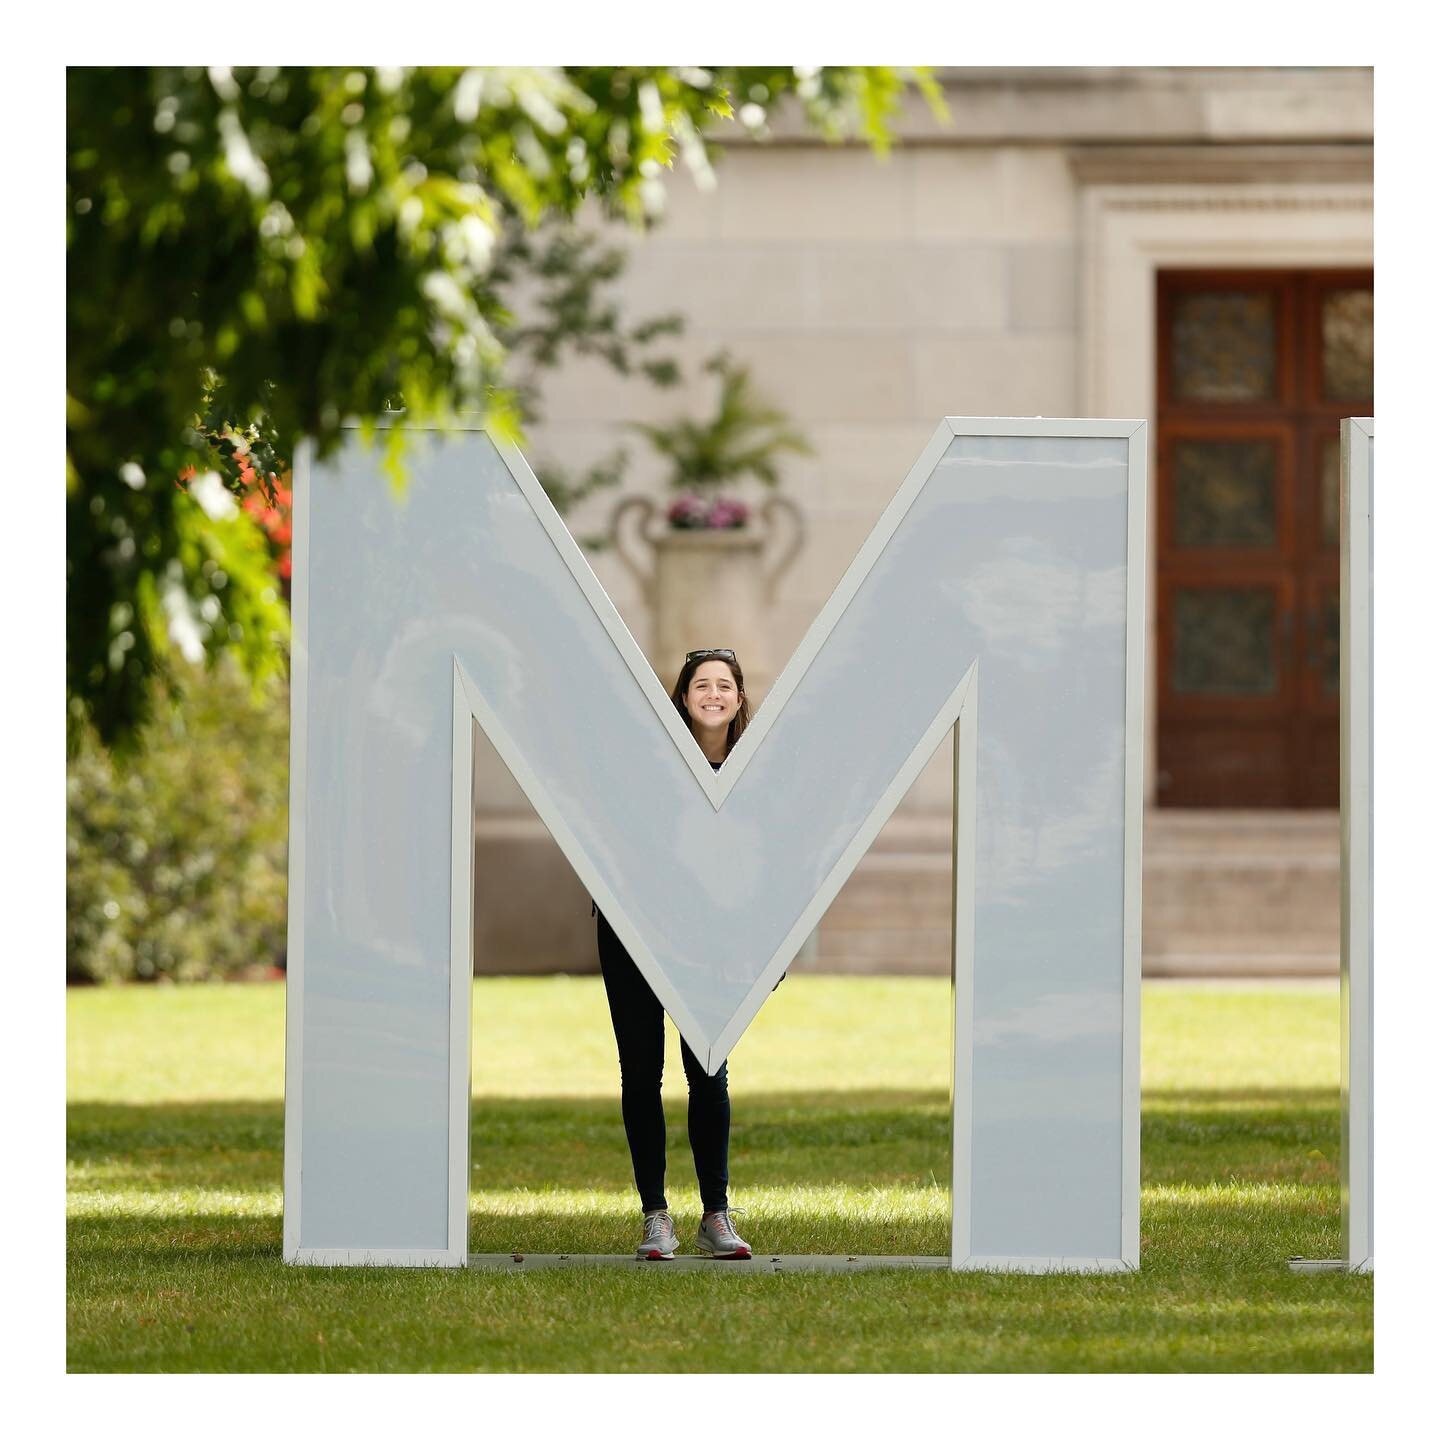 Happily putting the &ldquo;M&rdquo; in Meliora for like 3ish months #meliora2021

(Thanks @mattwittmeyer for the personality pics🥸)